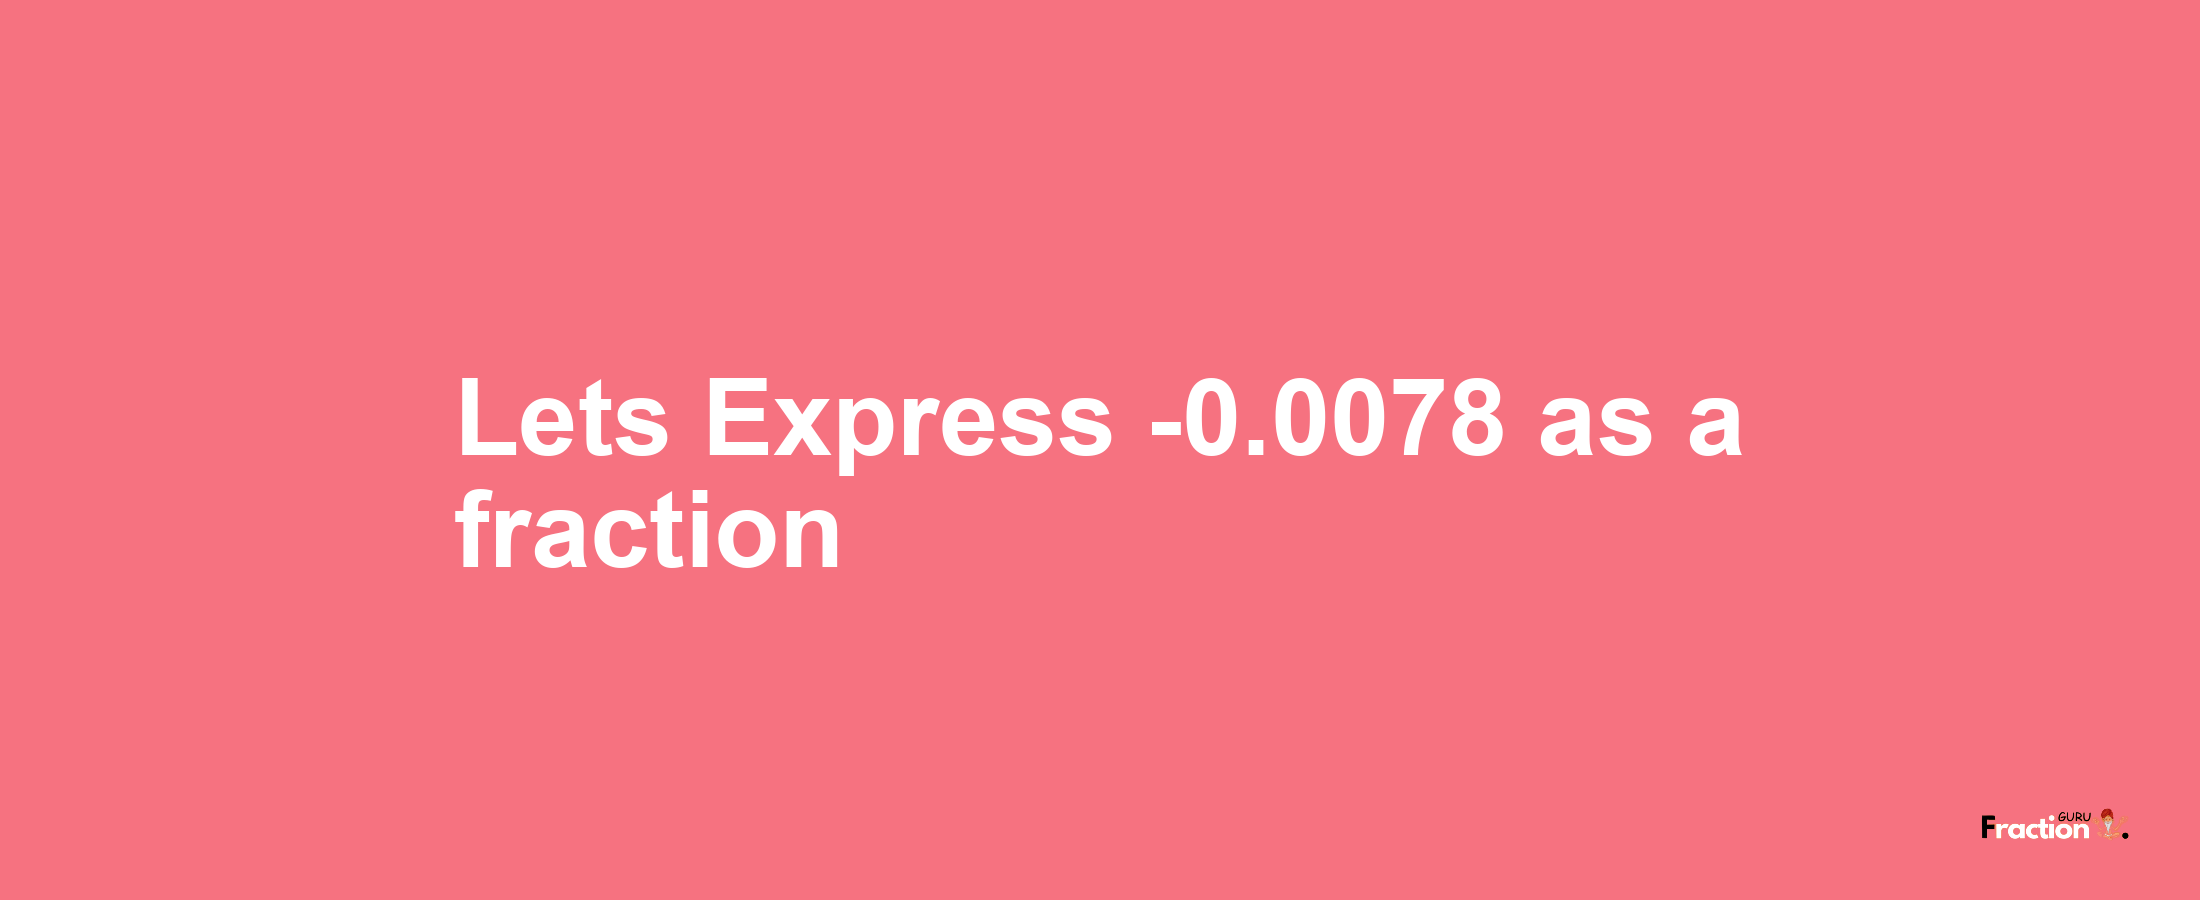 Lets Express -0.0078 as afraction